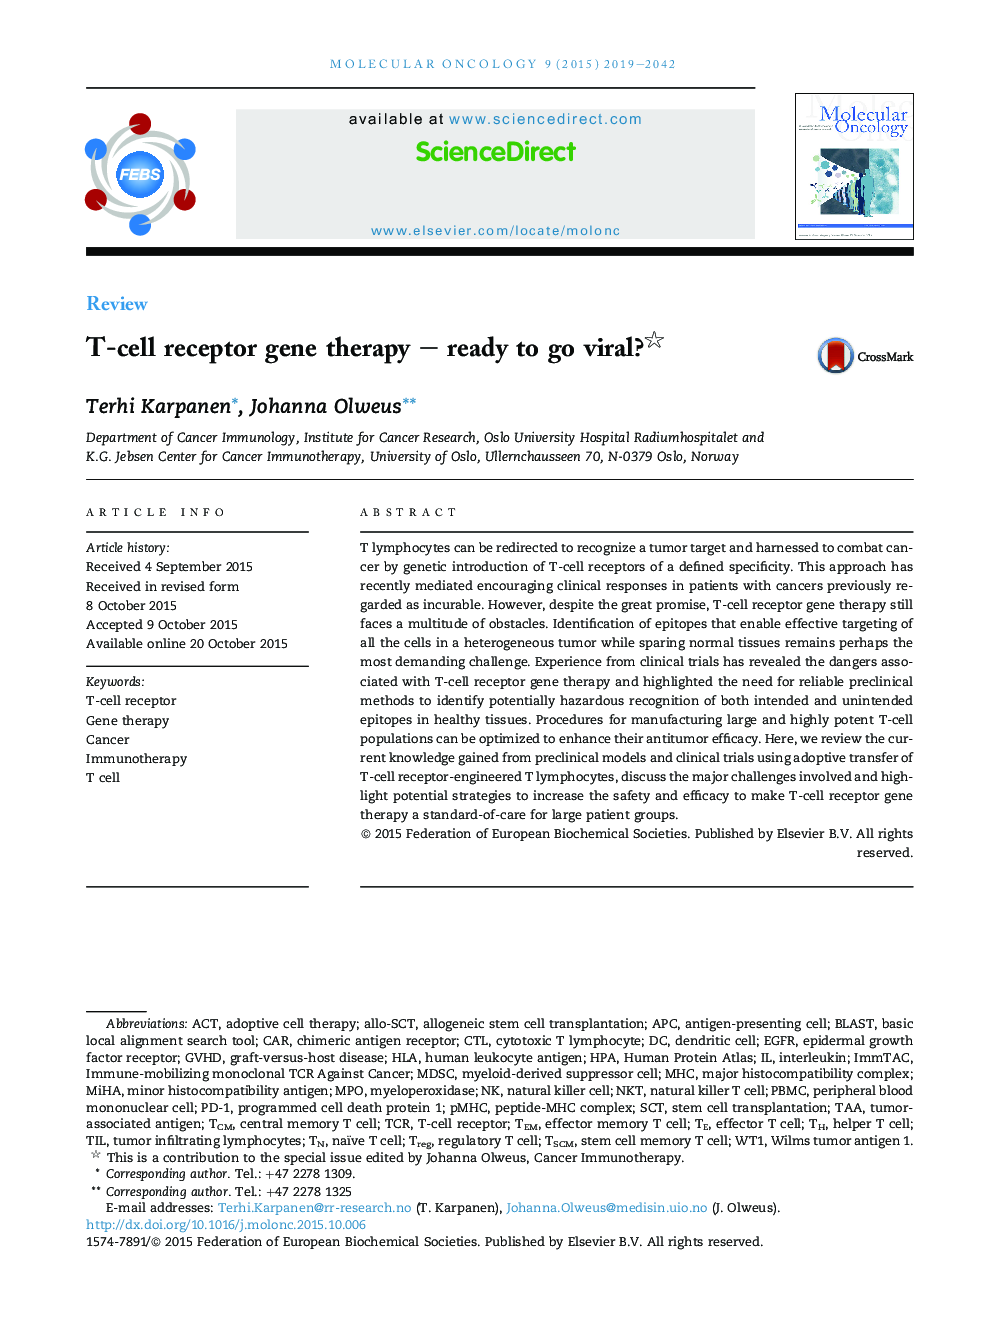 T-cell receptor gene therapy - ready to go viral?